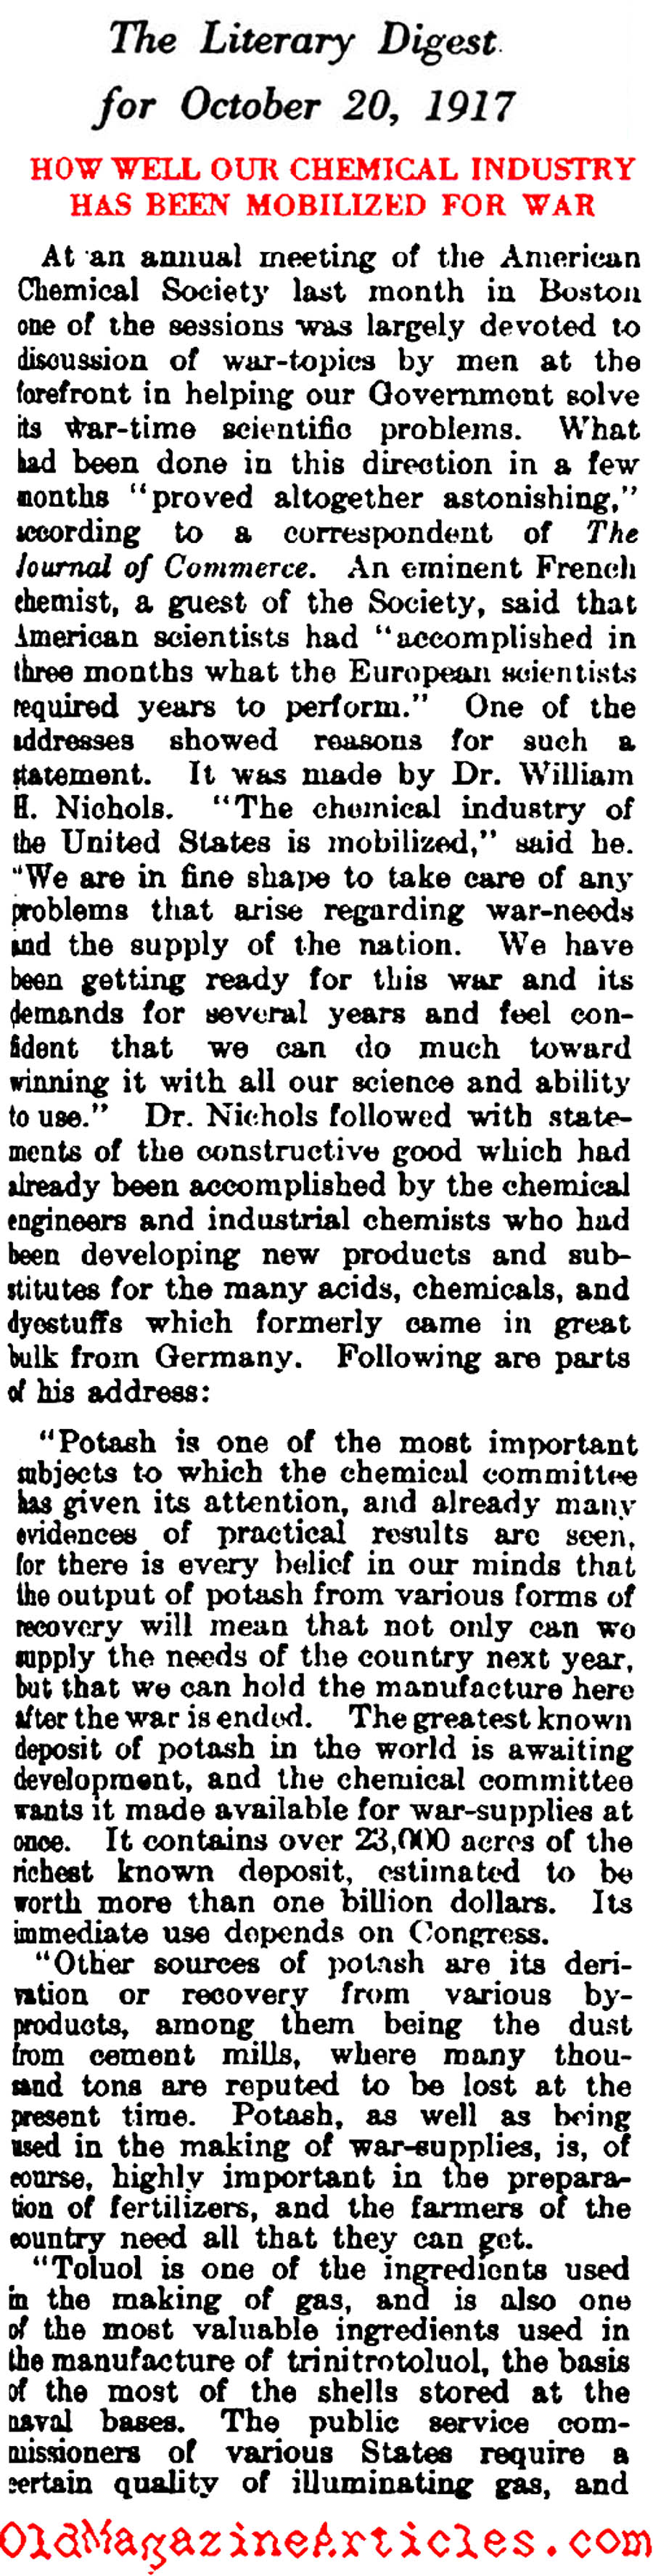 The Business End of Gas Warfare (Literary Digest, 1917)